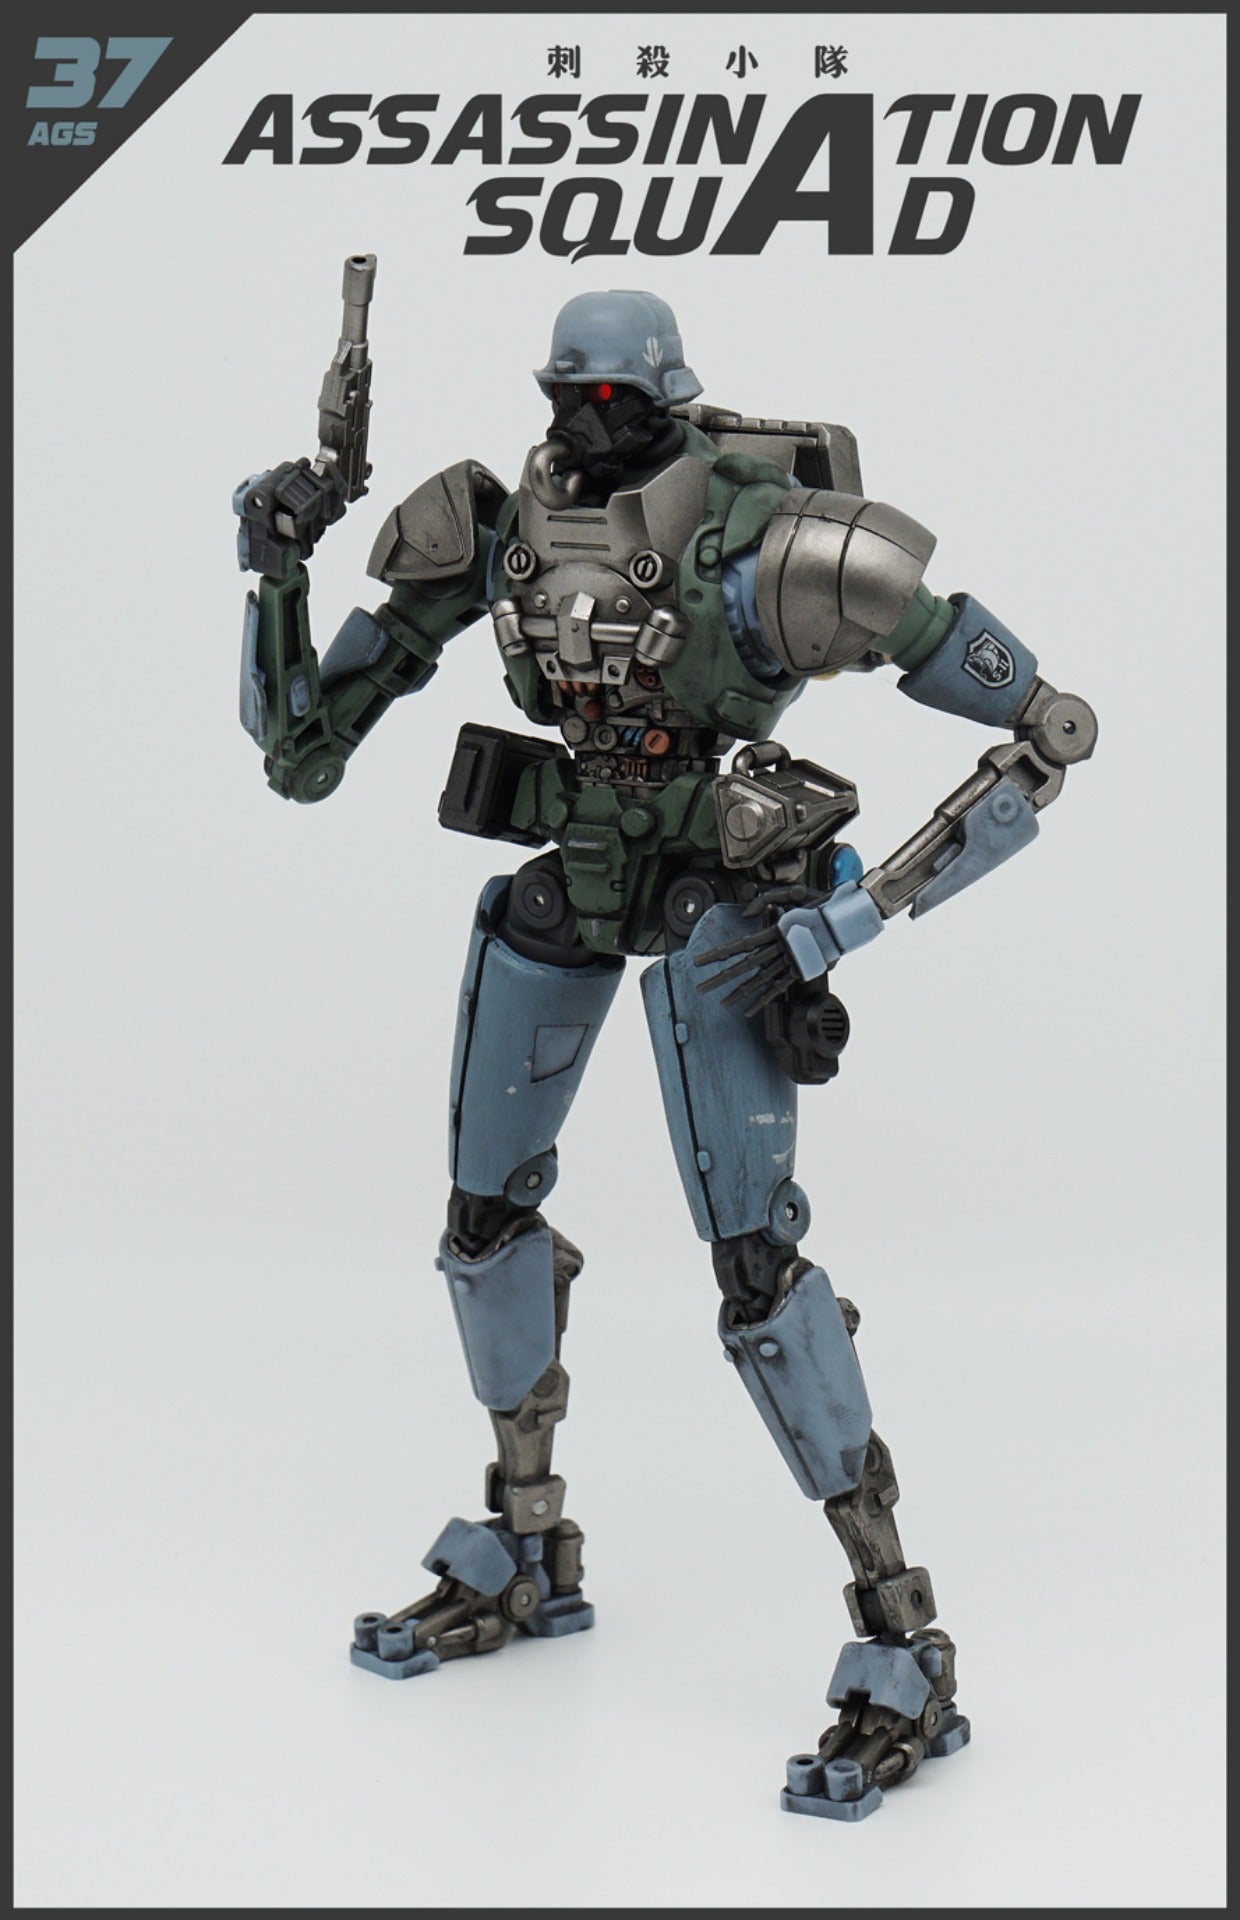 A new generation of 1/12 superalloy mecha by ToysComic! This Forging Soul AGS-37 Assassination Squad Signaler Vulture comes armed with various weapons and accessories.